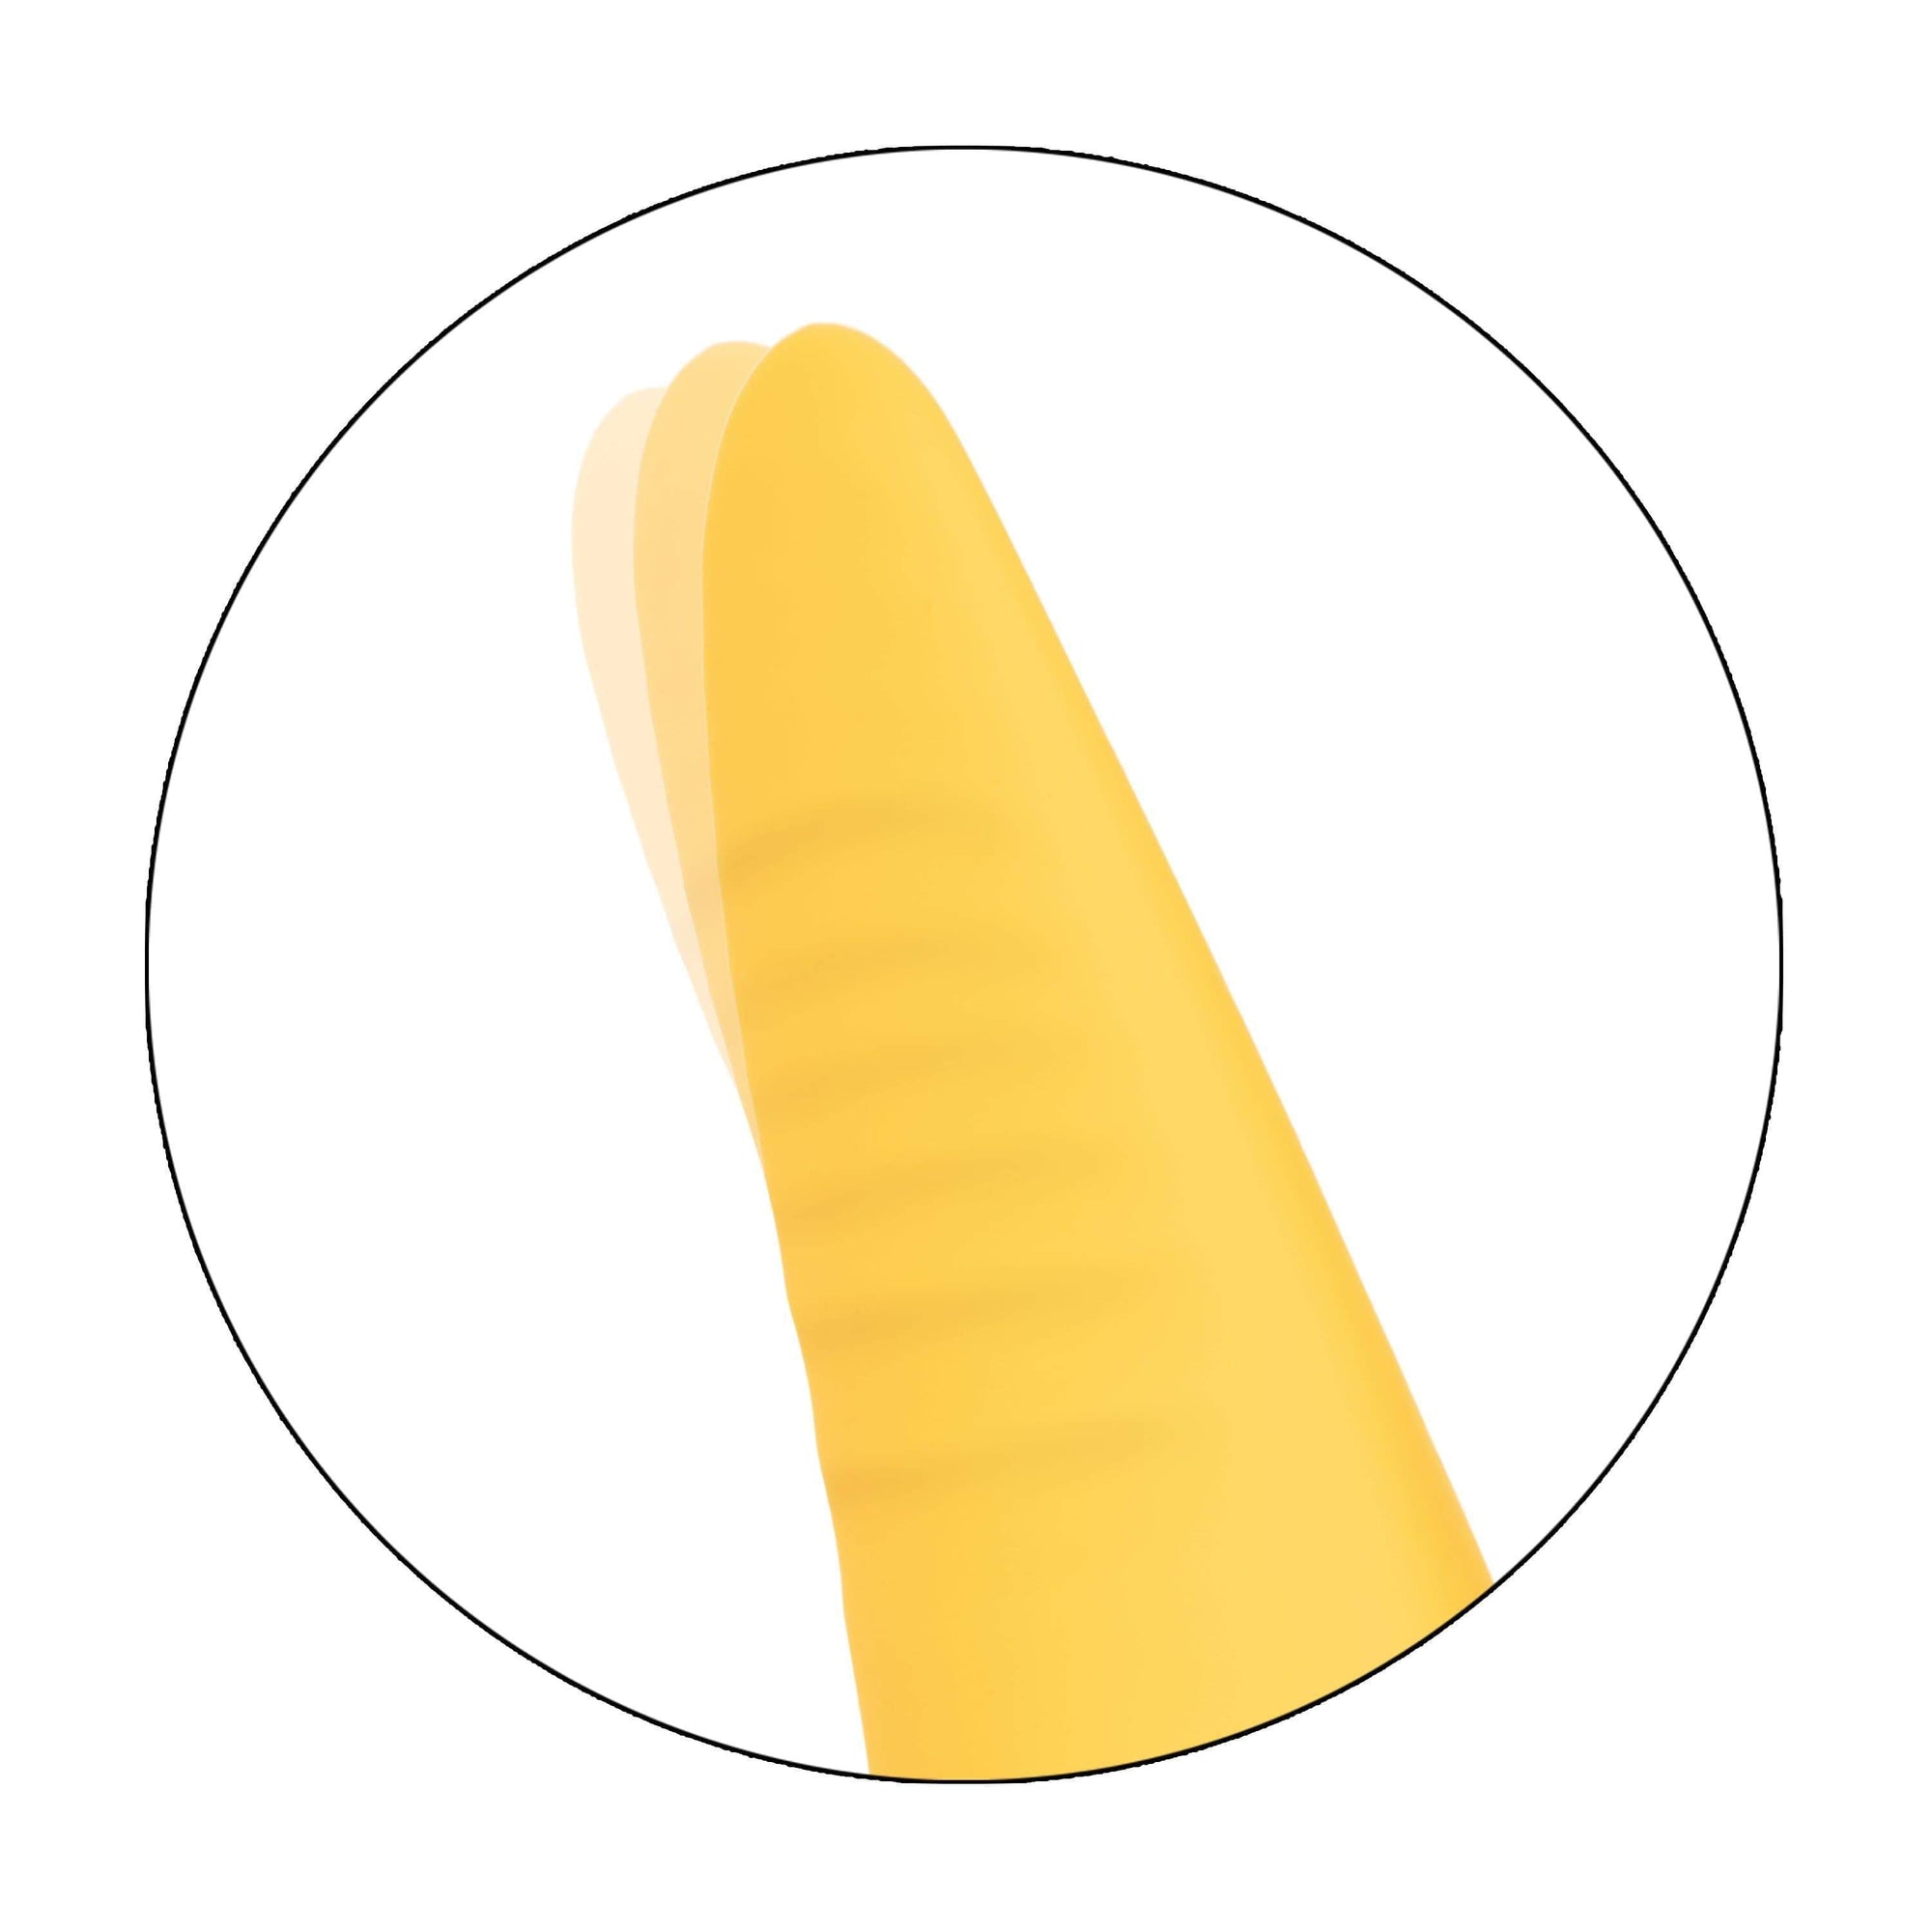 California Exotics - California Dreaming Hollywood Hottie Clit Massager (Yellow) -  Clit Massager (Vibration) Rechargeable  Durio.sg